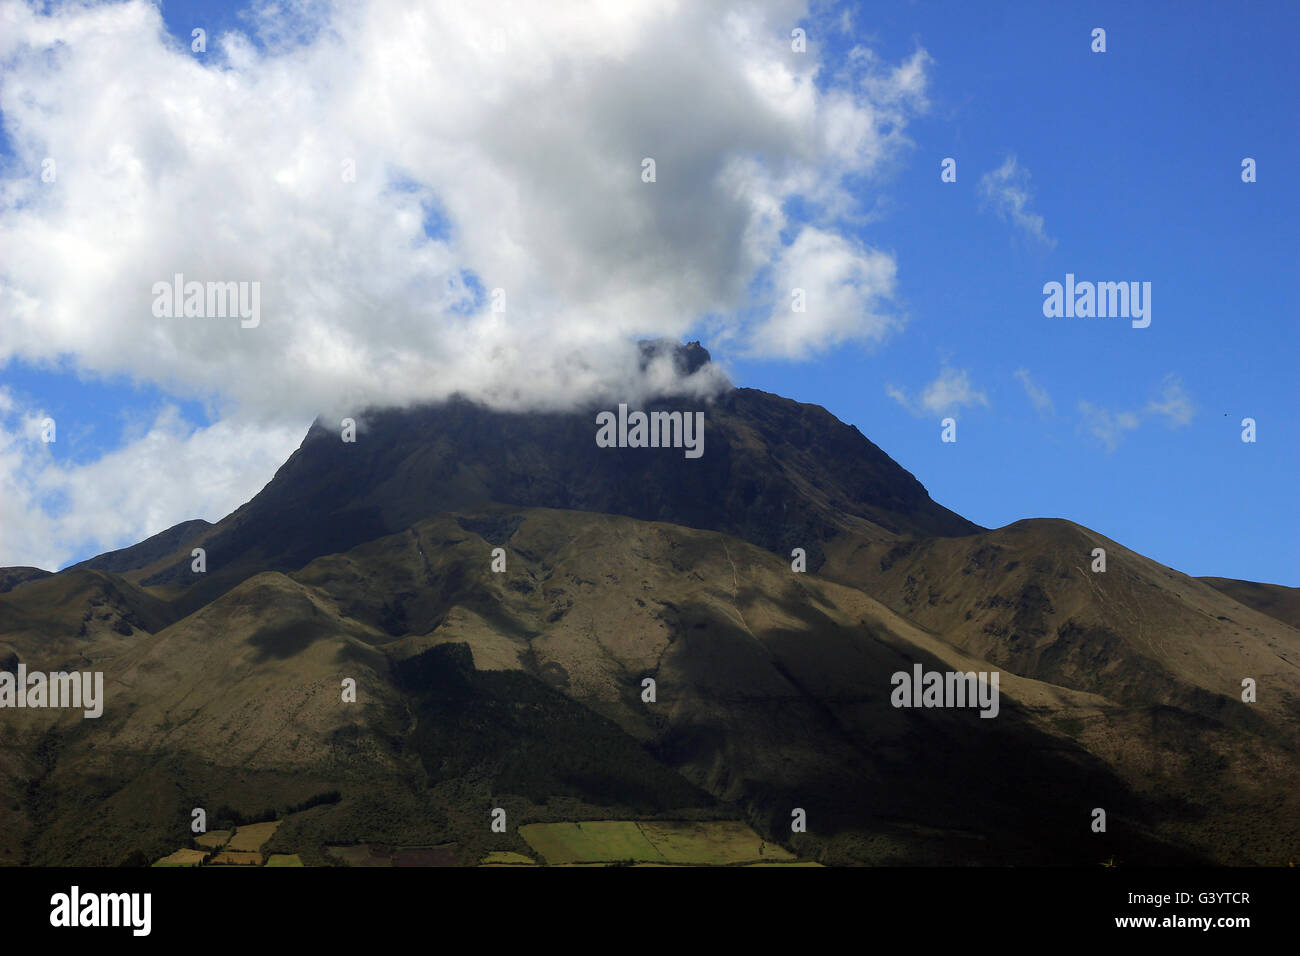 Clouds on the summit of the volcano, Mount Imbabura, in the Andes Mountains near Cotacachi, Ecuador Stock Photo